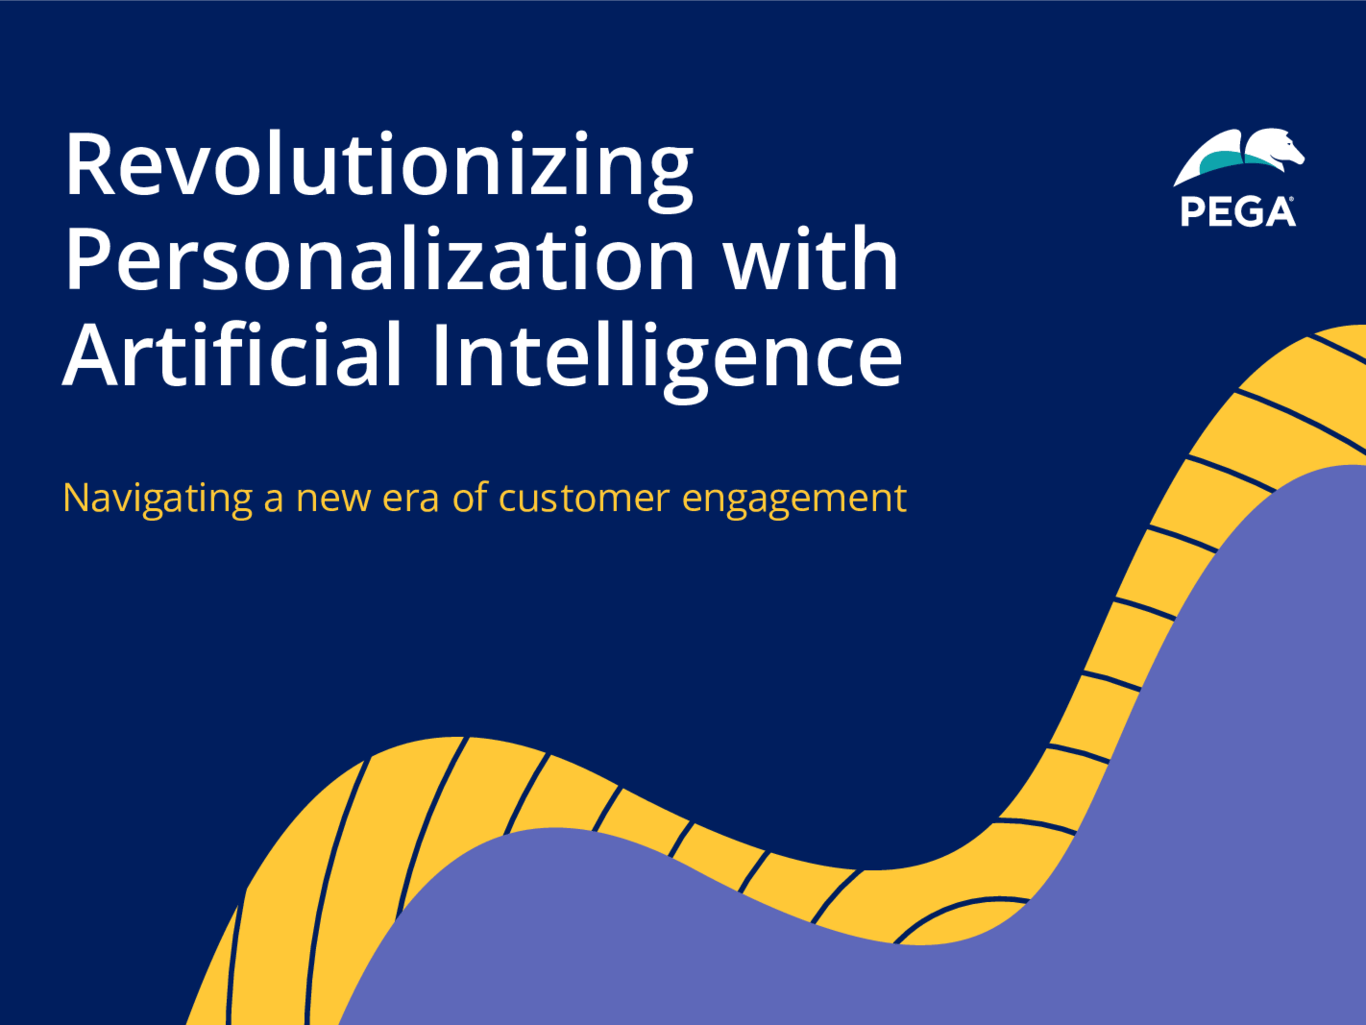 Revolutionizing Personalization with Artificial Intelligence